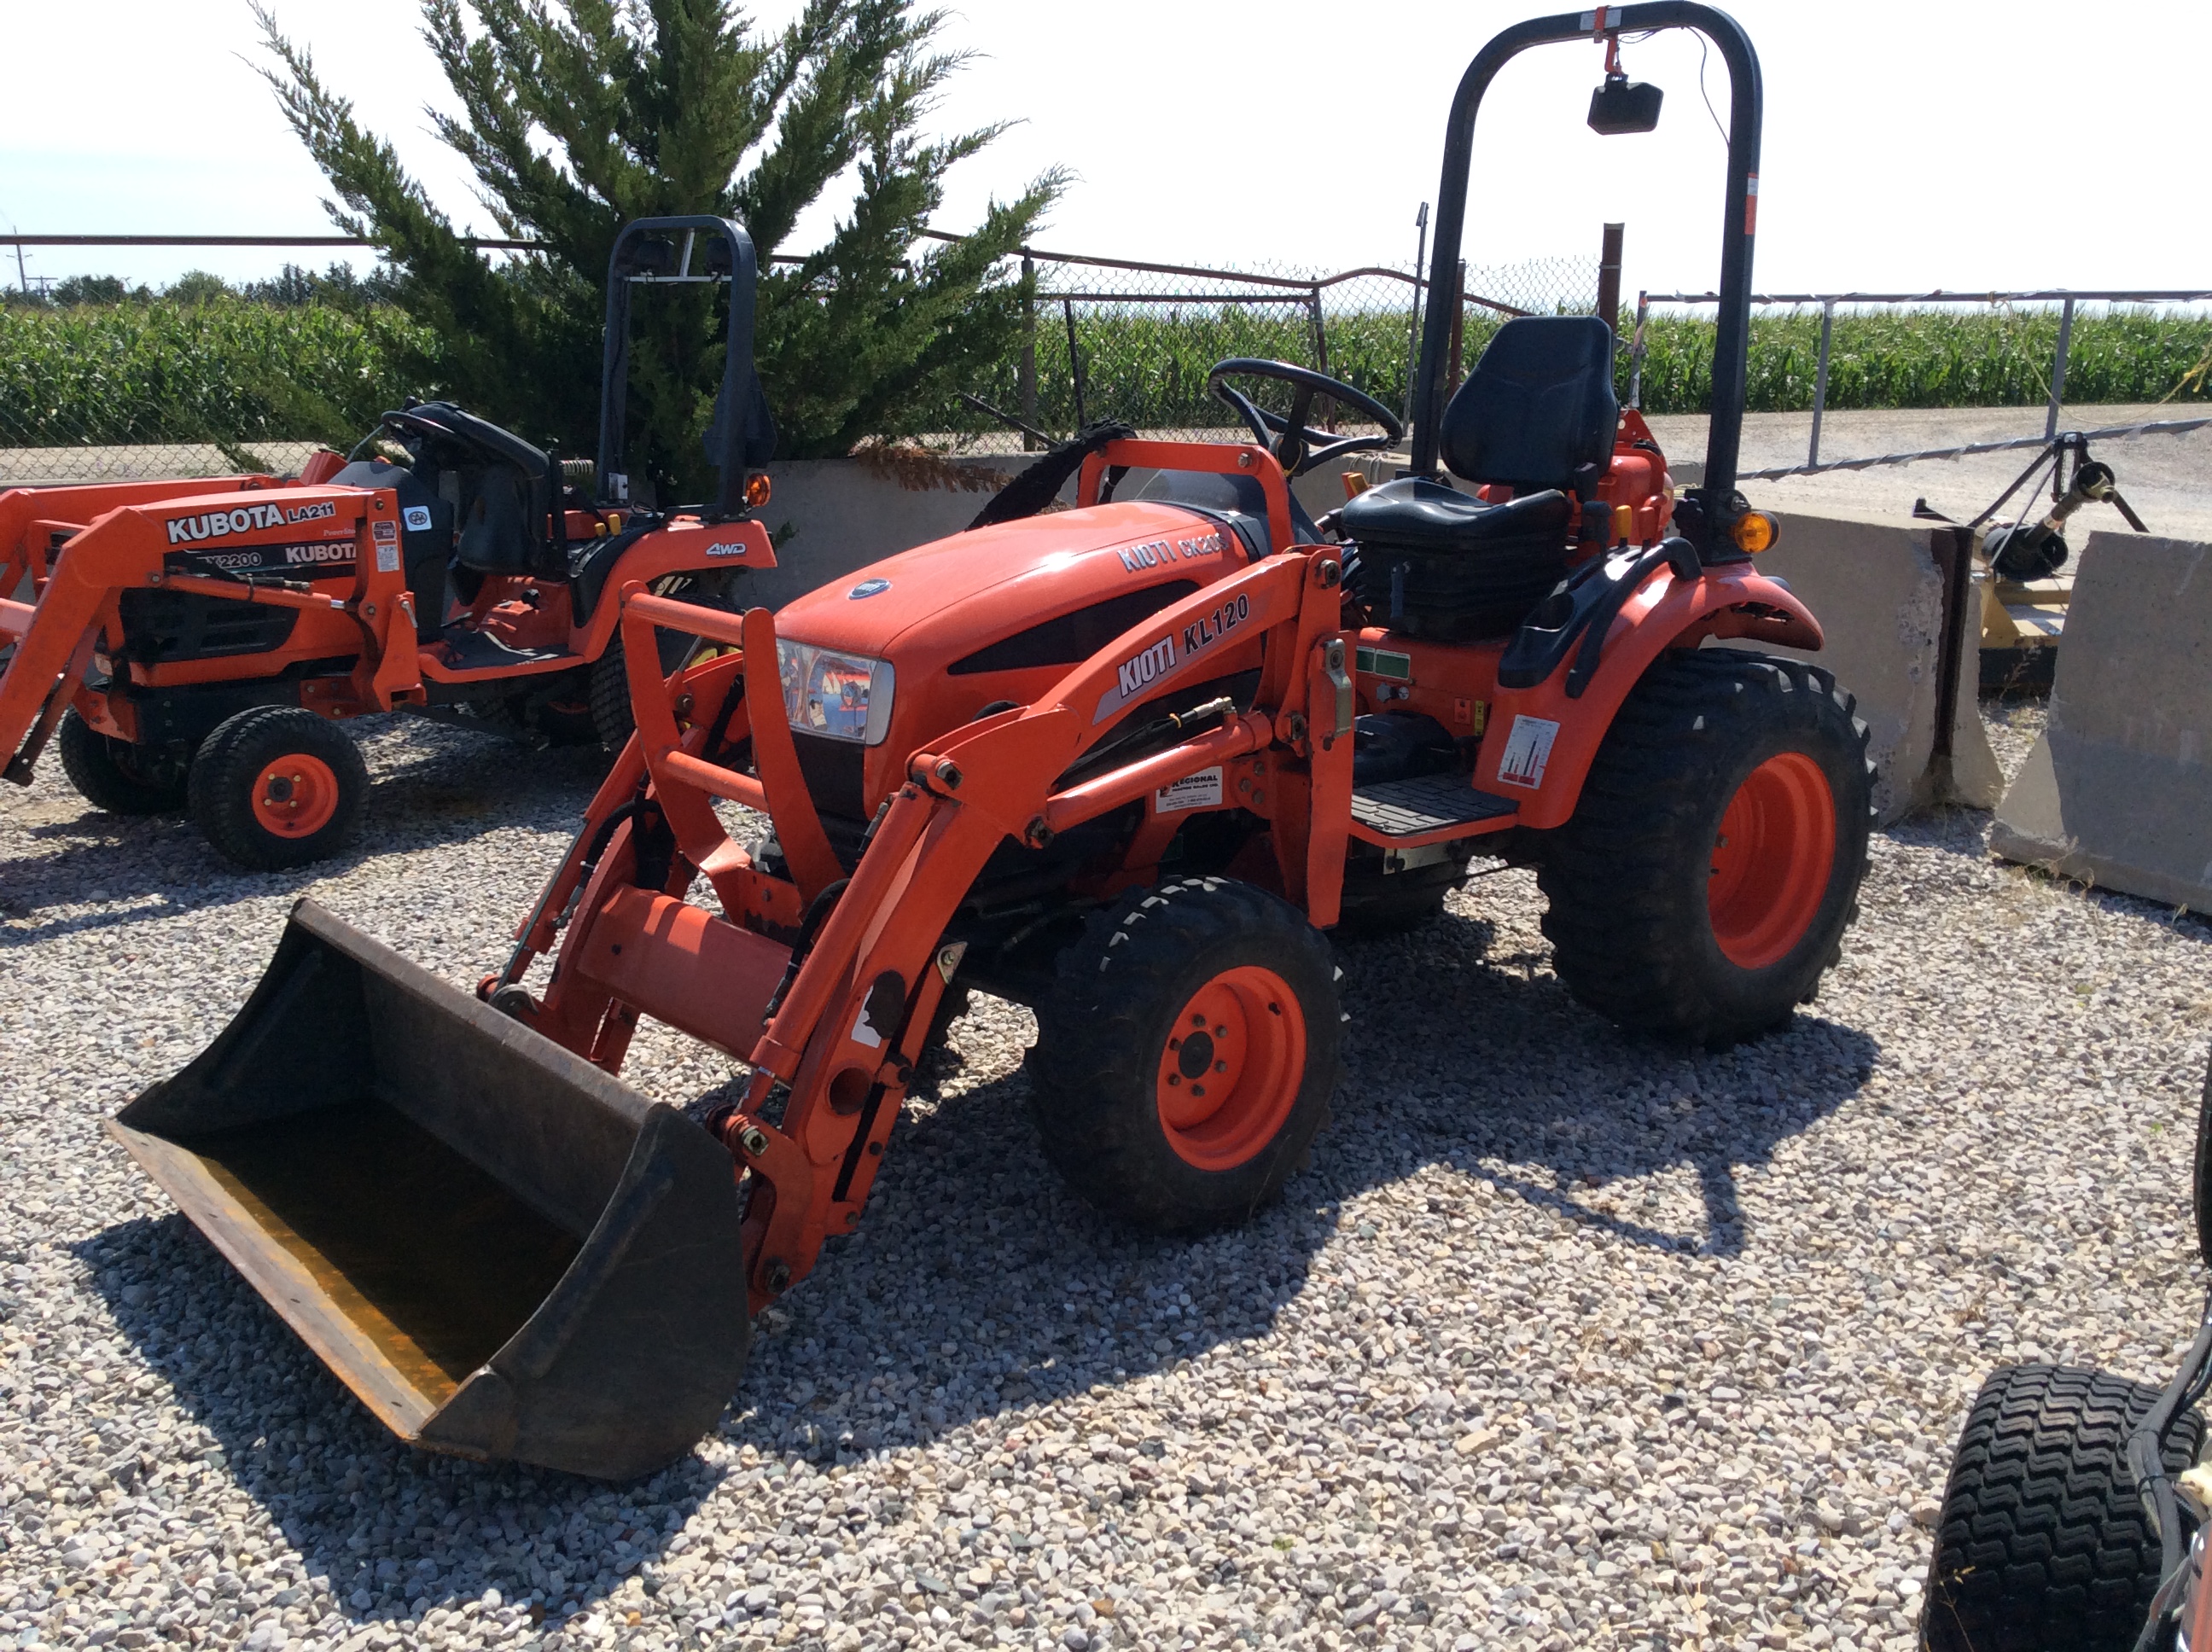 2002 Kubota Bx2200d Tractor For Sale In Hensall On Ironsearch